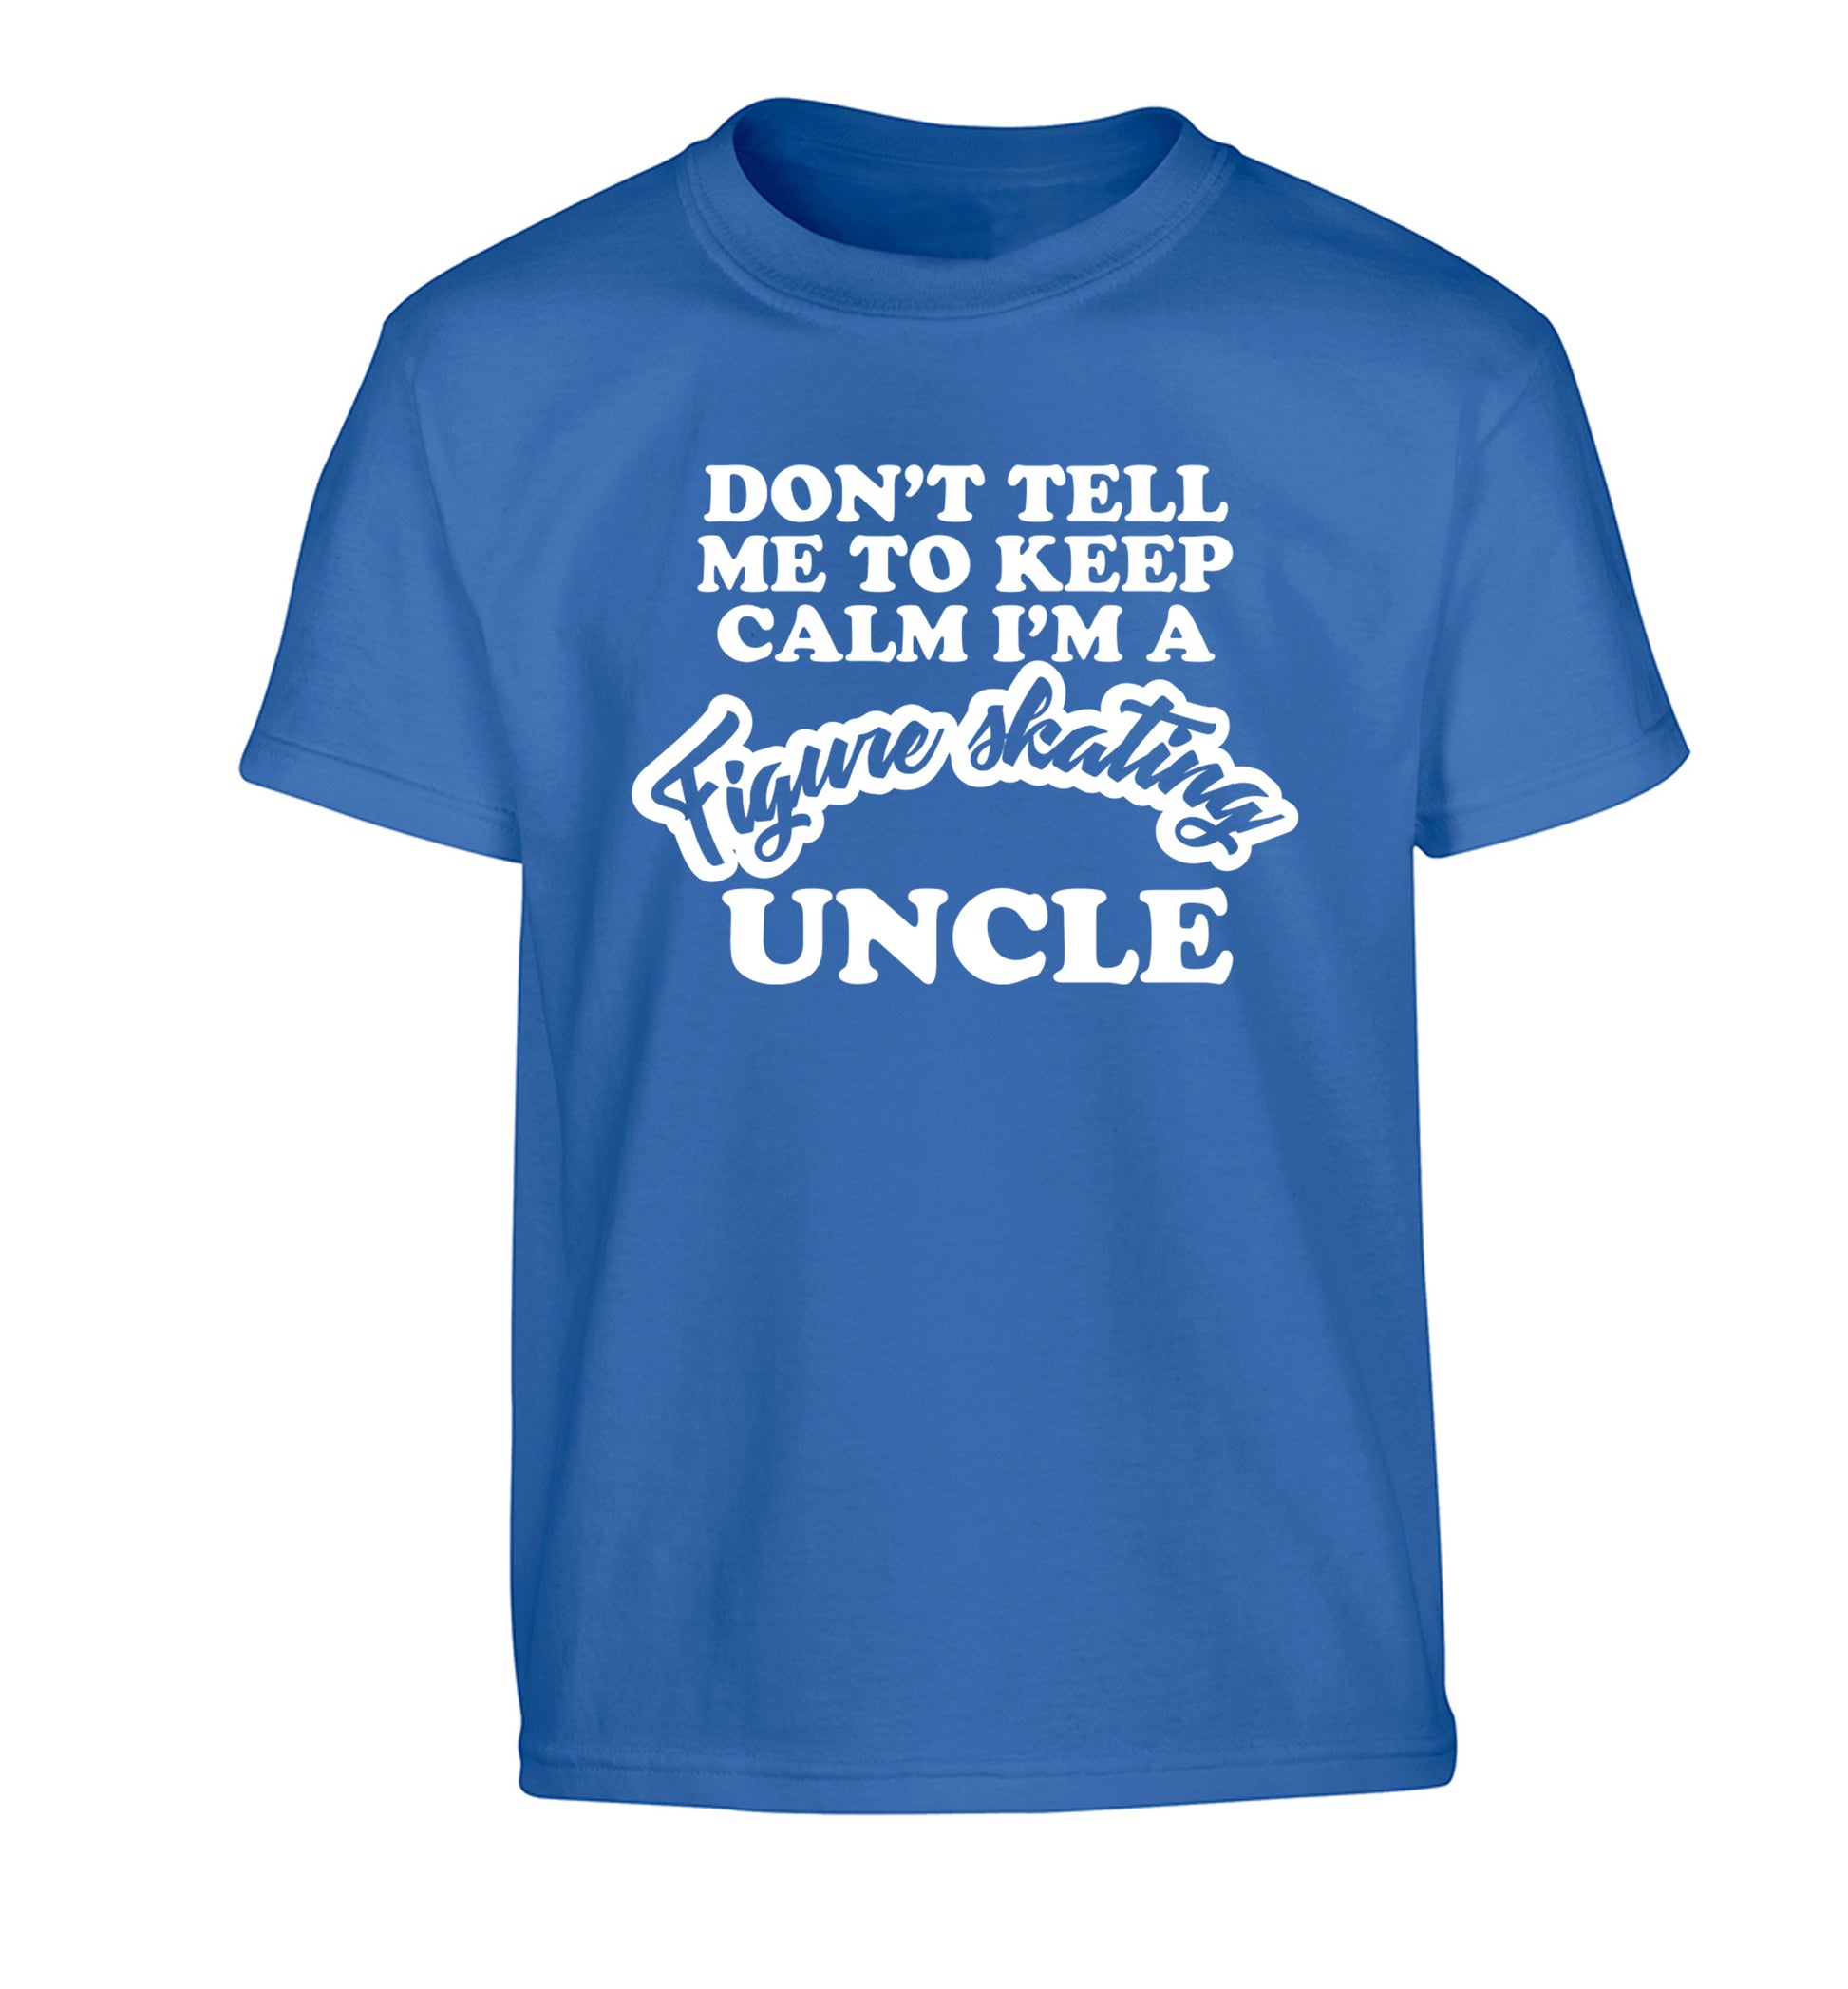 Don't tell me to keep calm I'm a figure skating uncle Children's blue Tshirt 12-14 Years